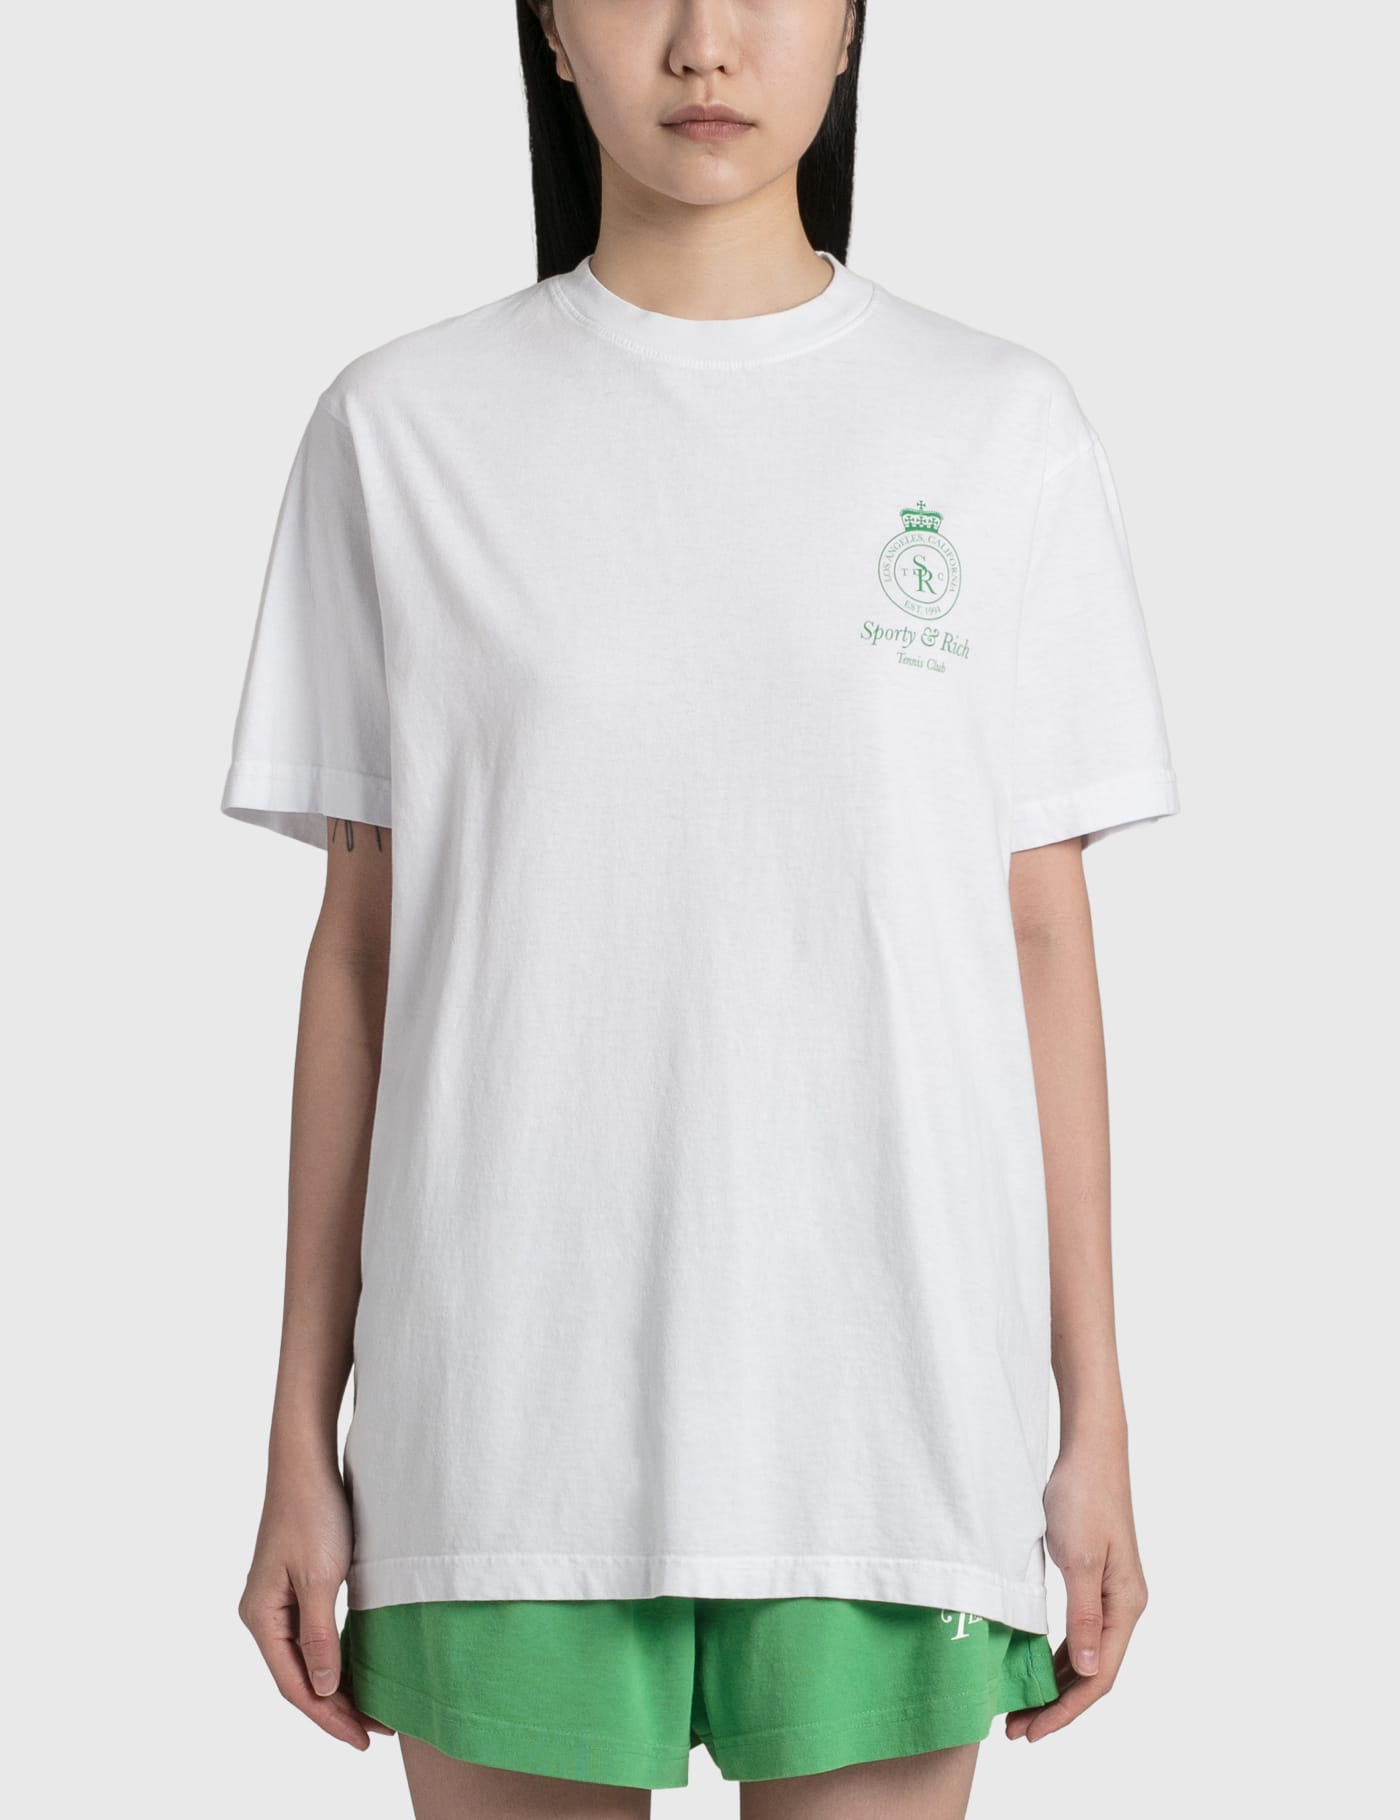 SPORTY&RICH(スポーティアンドリッチ) CROWN T SHIRT-